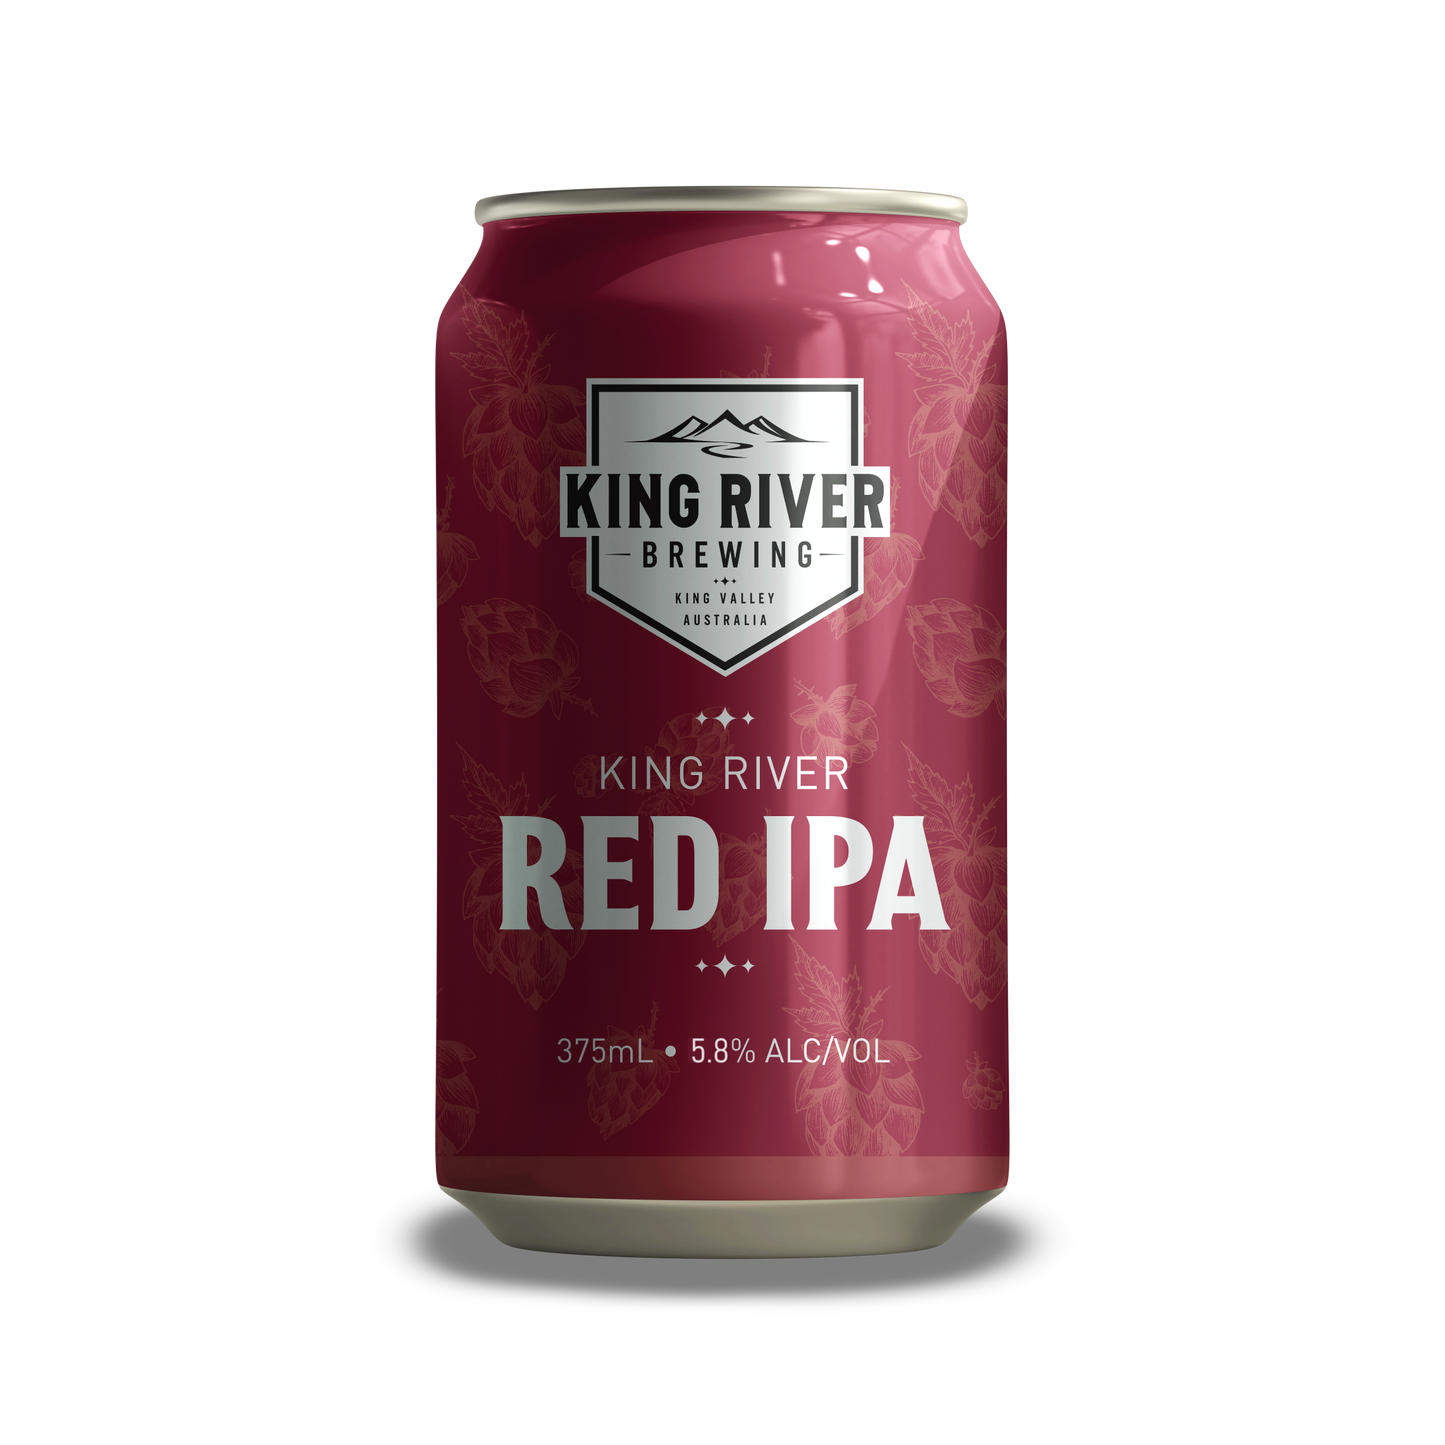 King River Red IPA